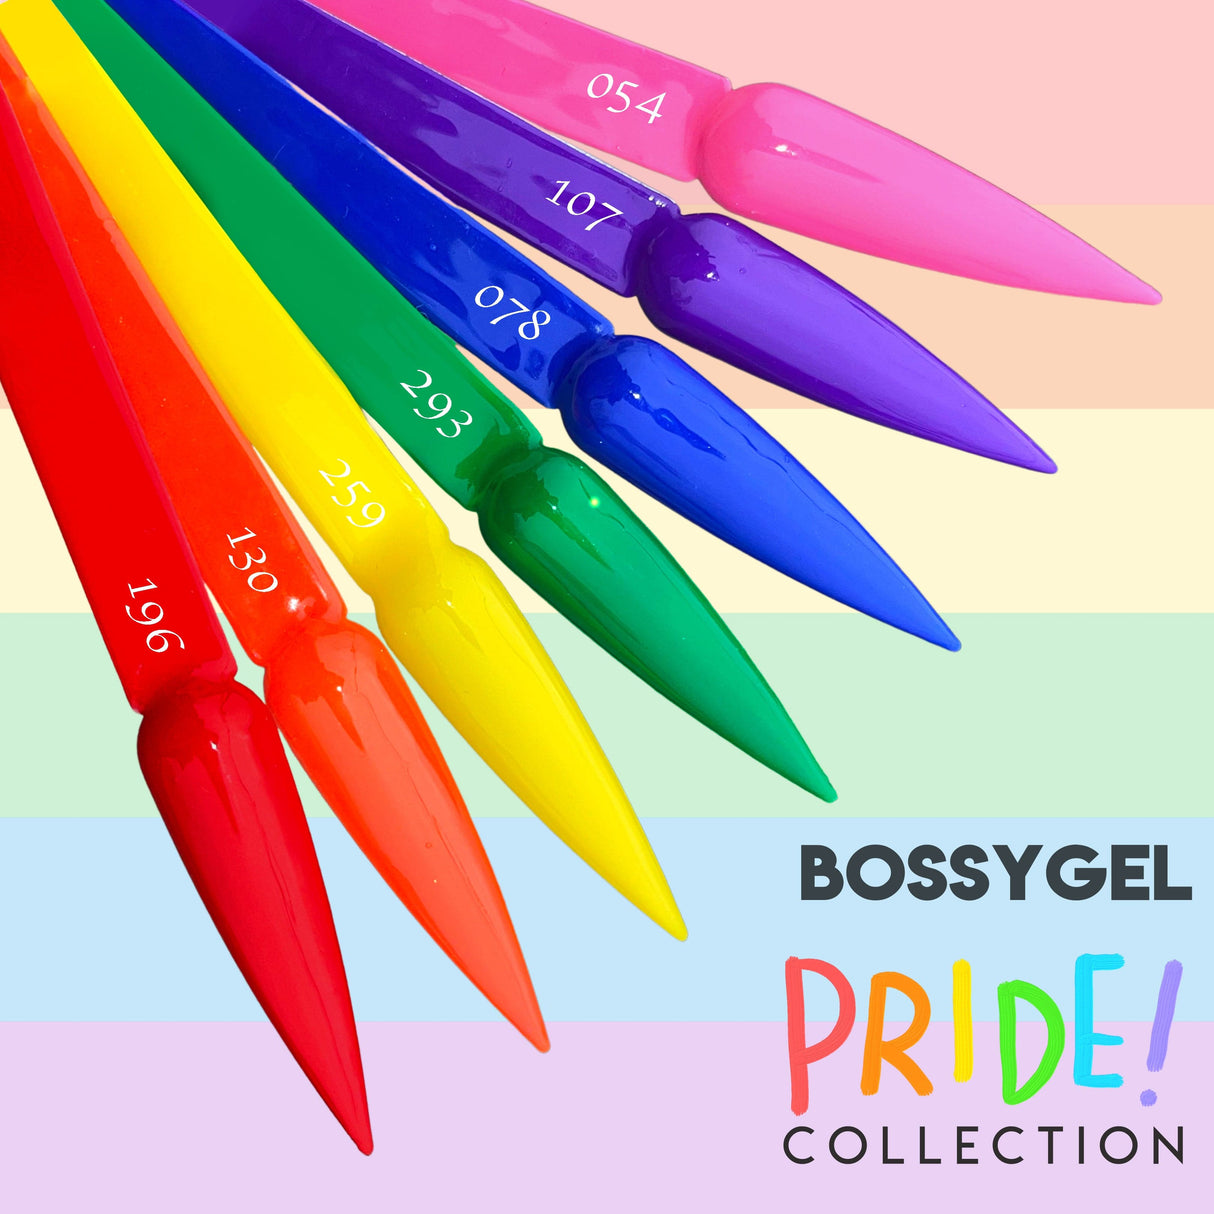 Bossy Gel PRIDE! Collection (ONLINE ONLY!!!)